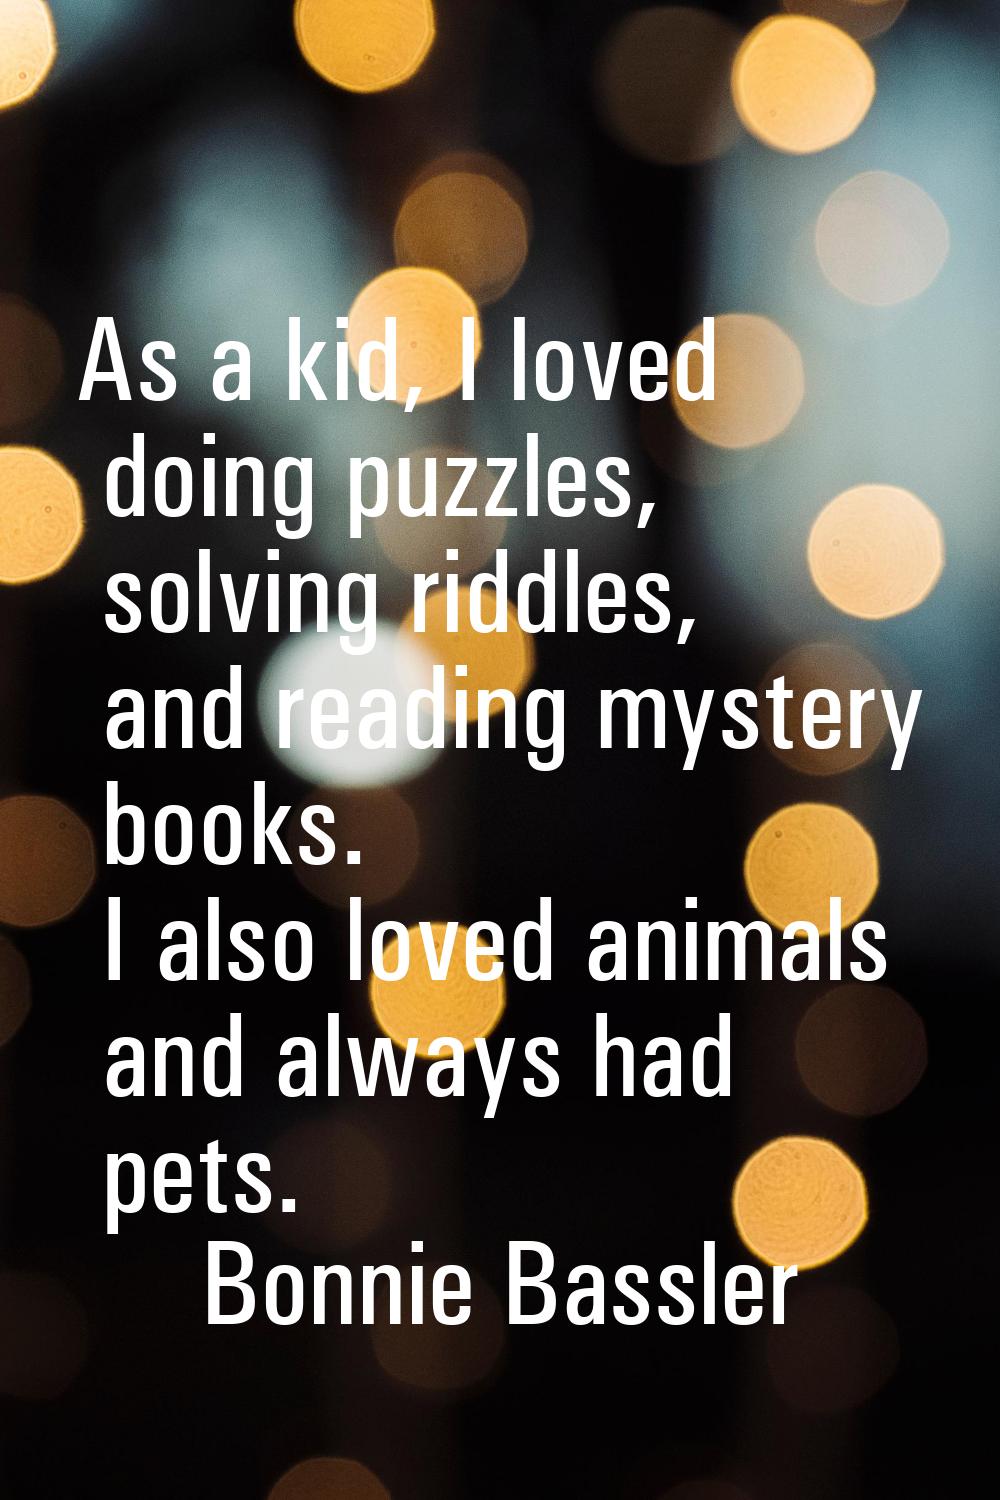 As a kid, I loved doing puzzles, solving riddles, and reading mystery books. I also loved animals a